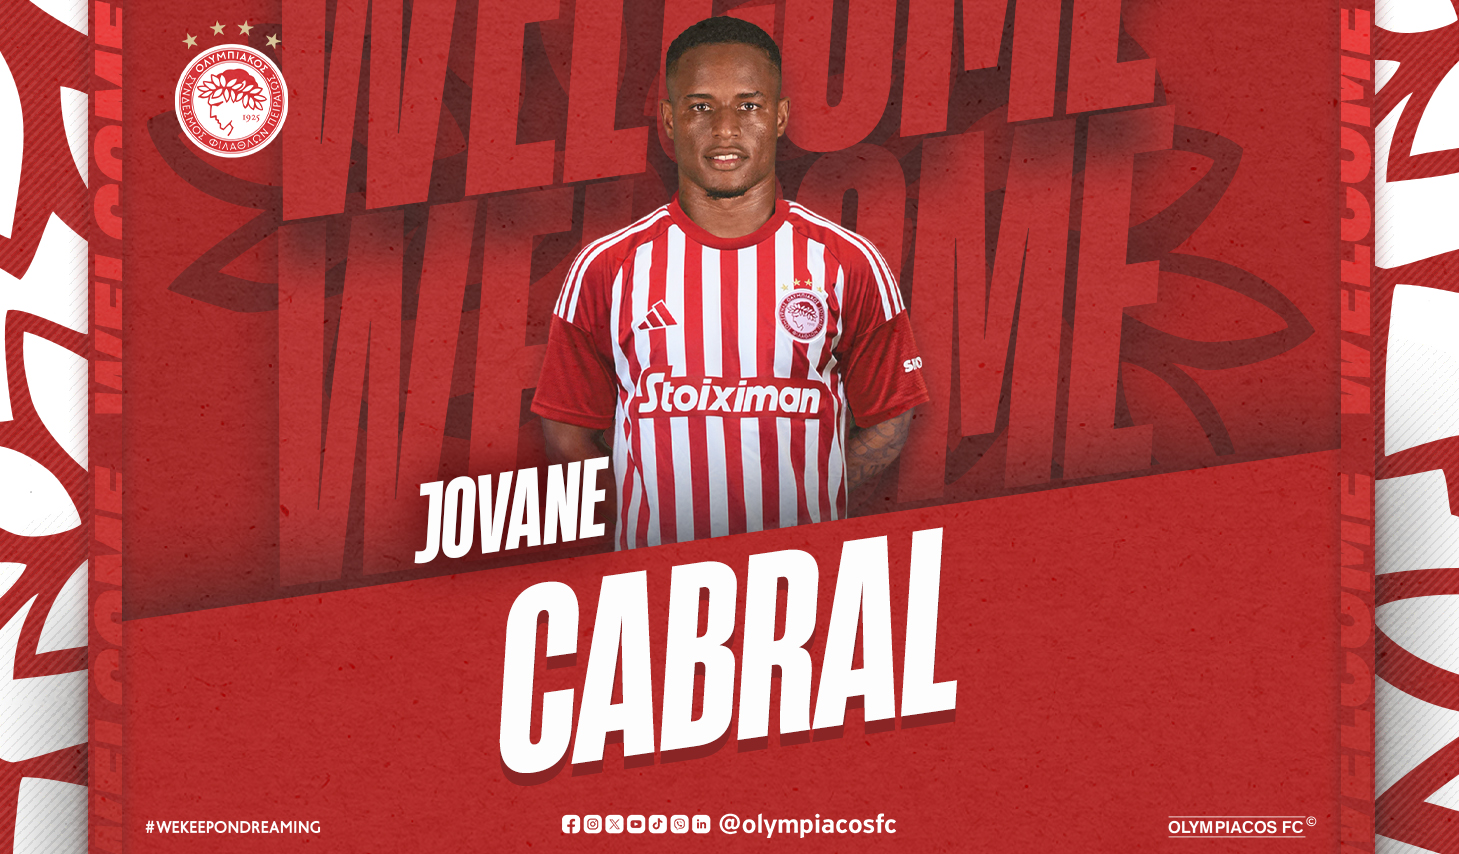 Cabral joins Olympiacos